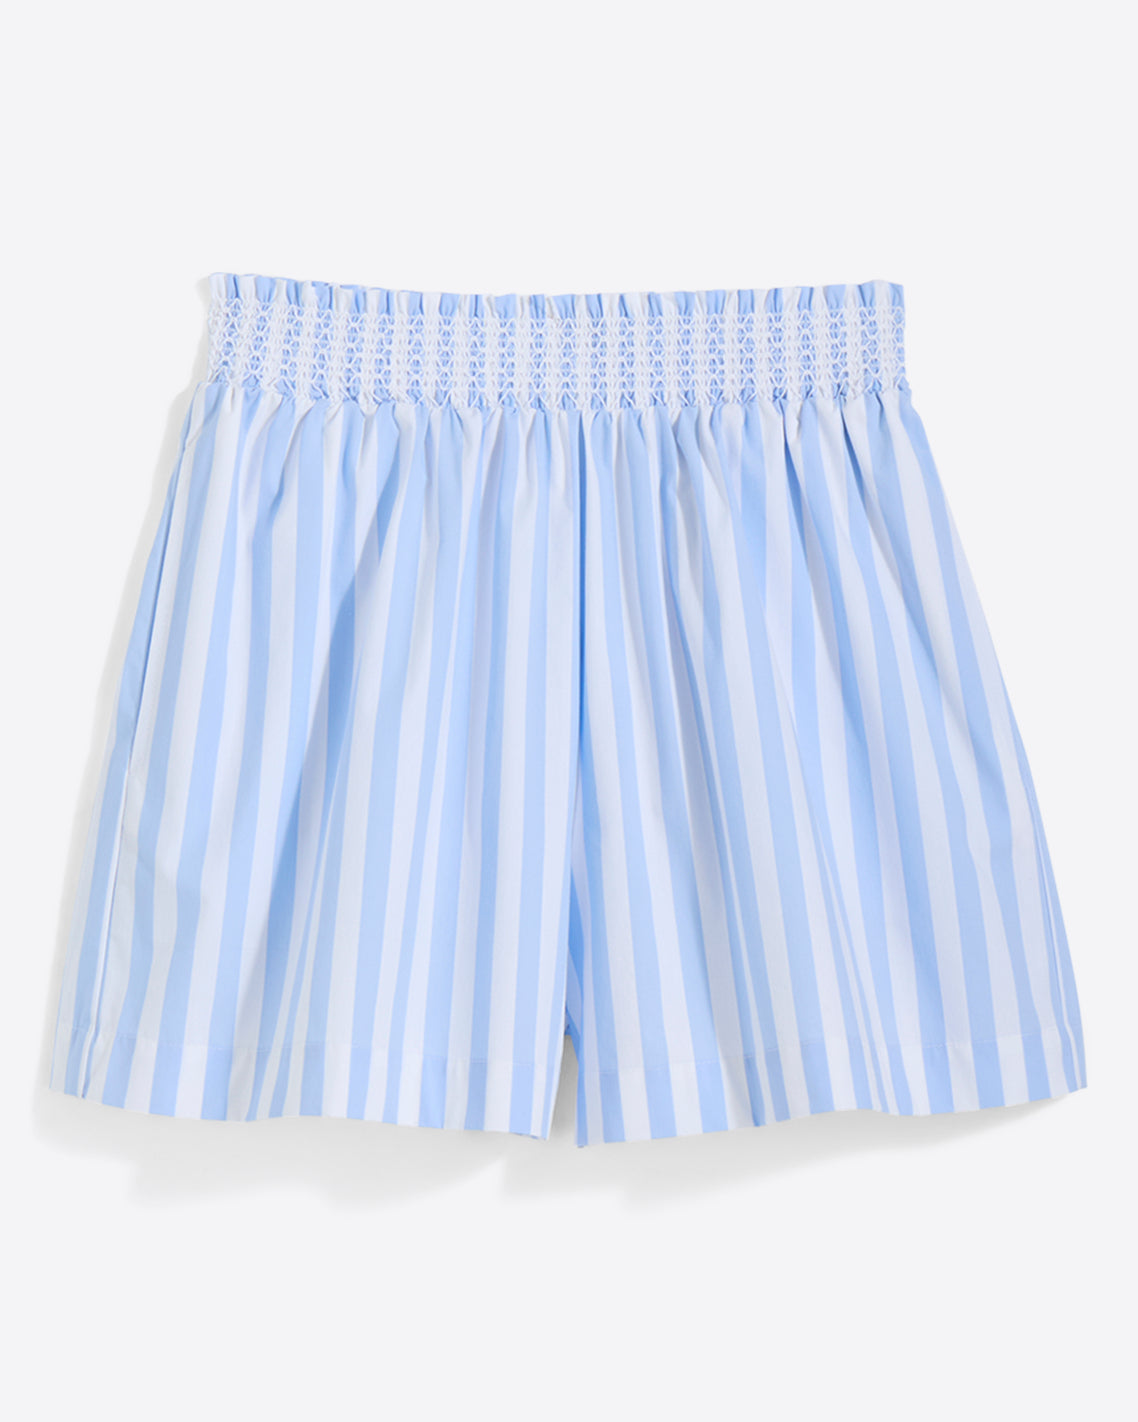 Relaxed Pull On Short in Crisp Cotton